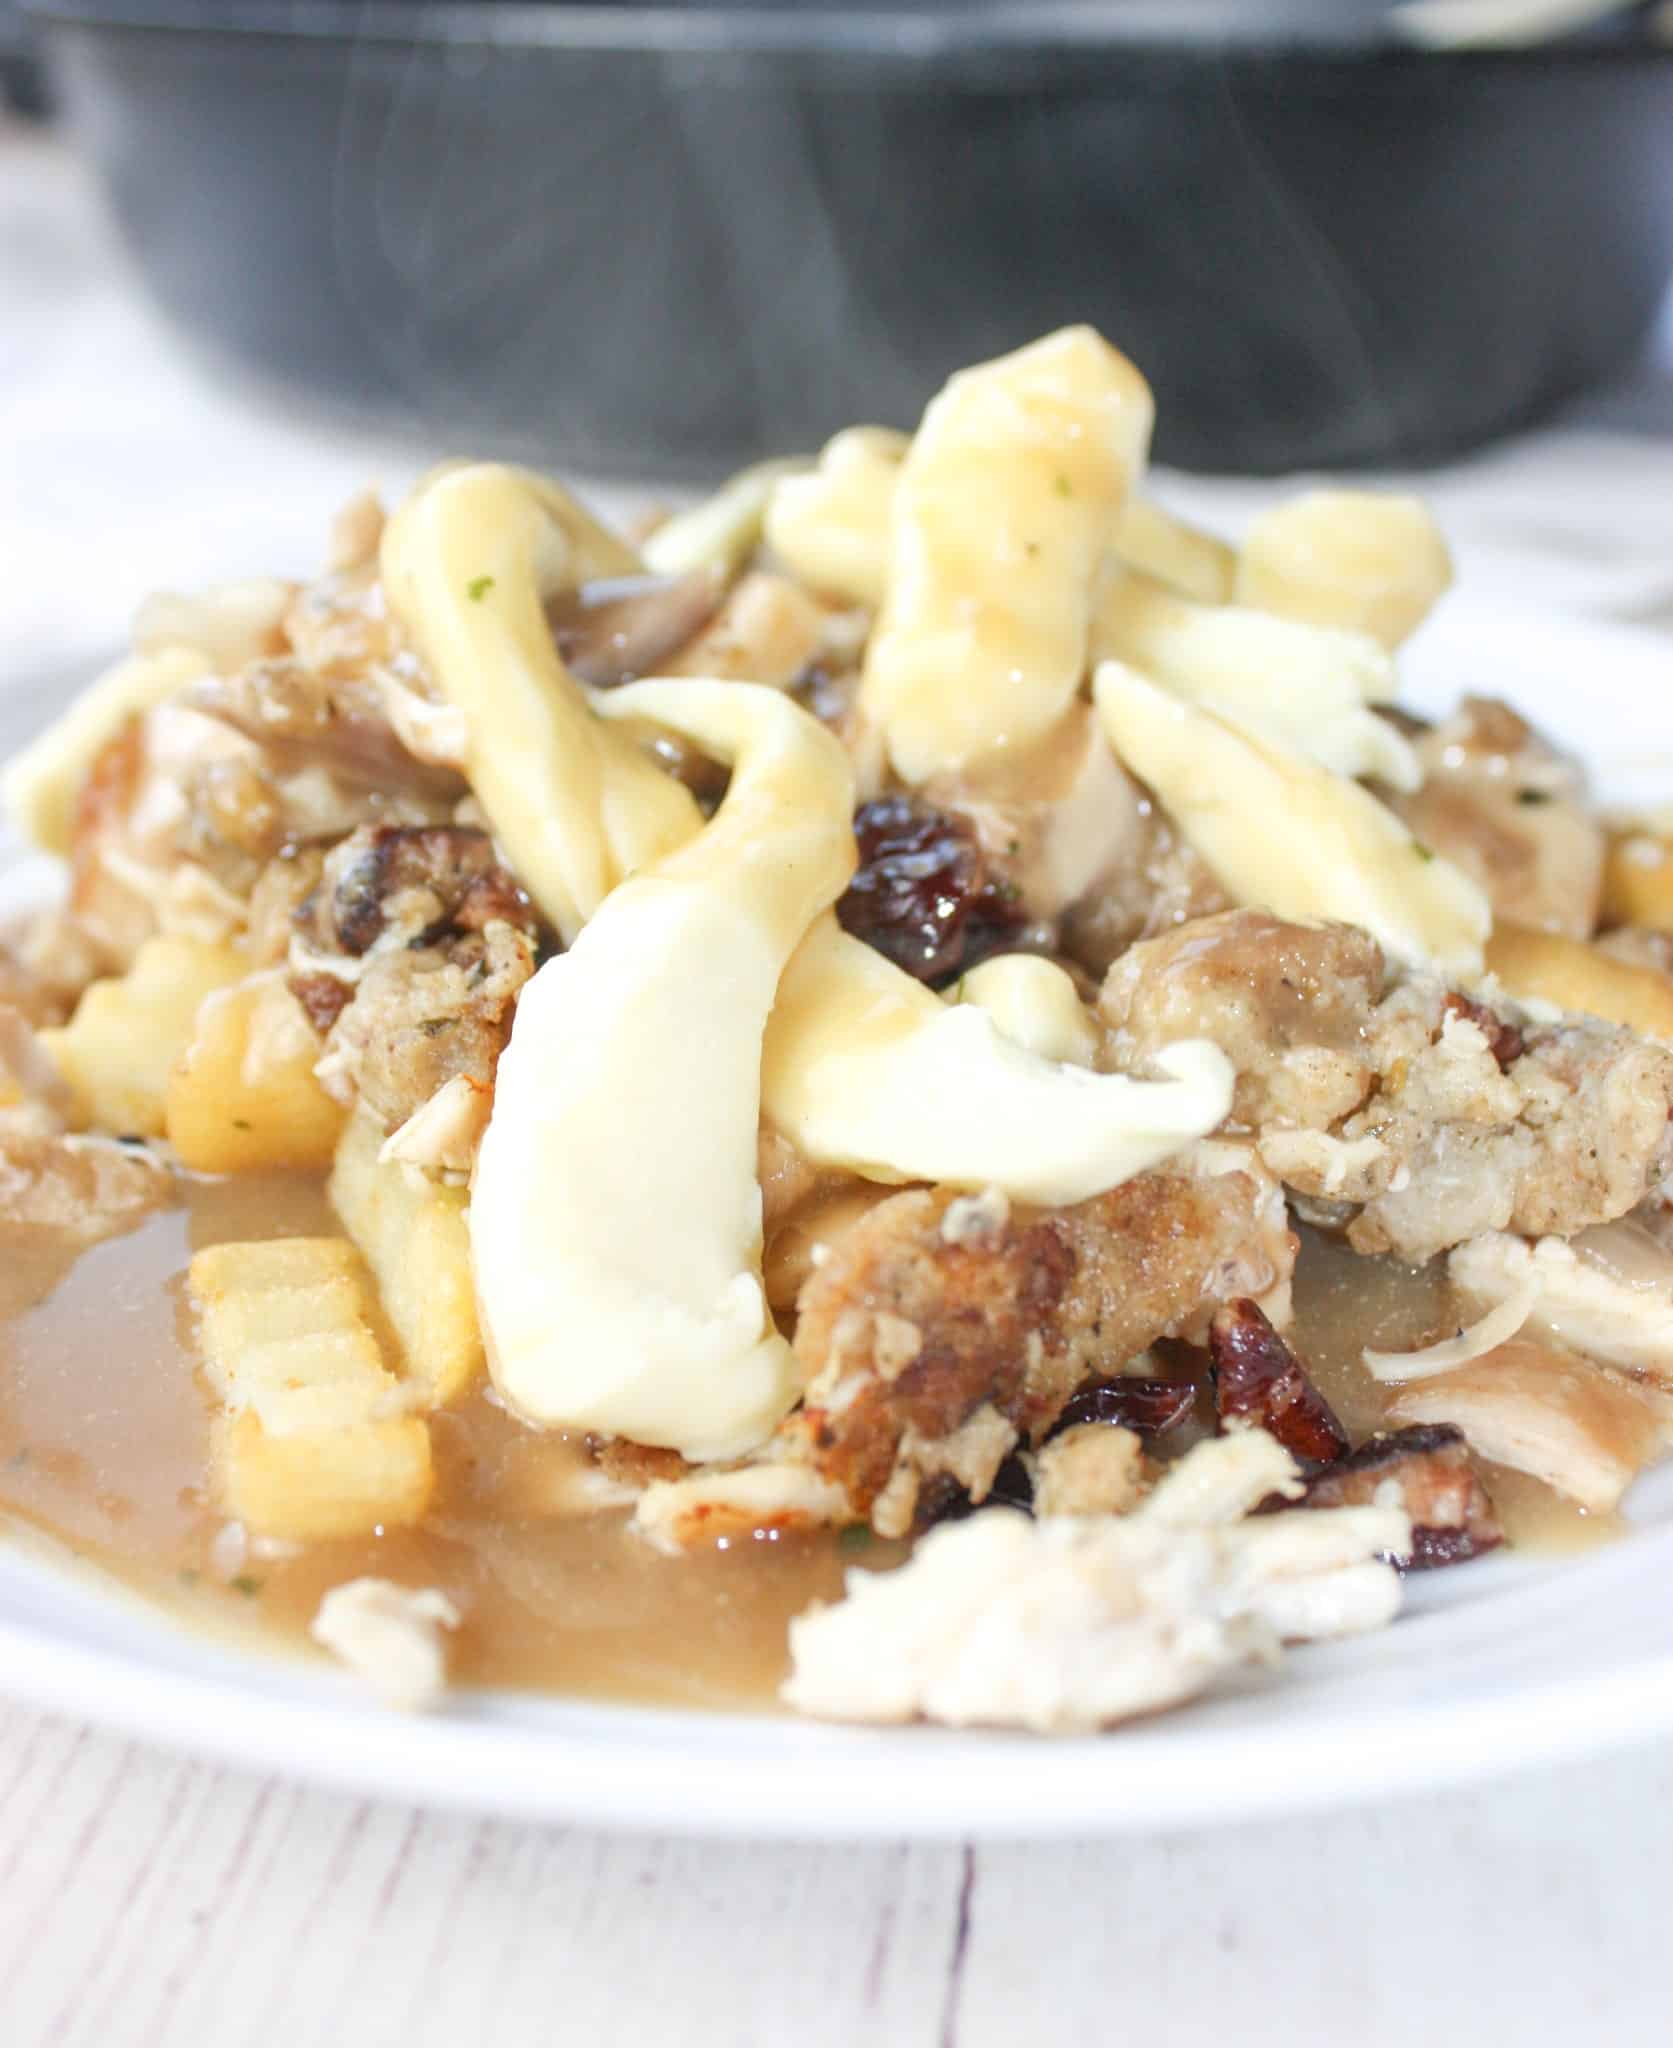 With Canadian Thanksgiving behind us and American Thanksgiving around the corner, Festive Poutine is an easy, tasty way to use up some holiday meal leftovers.